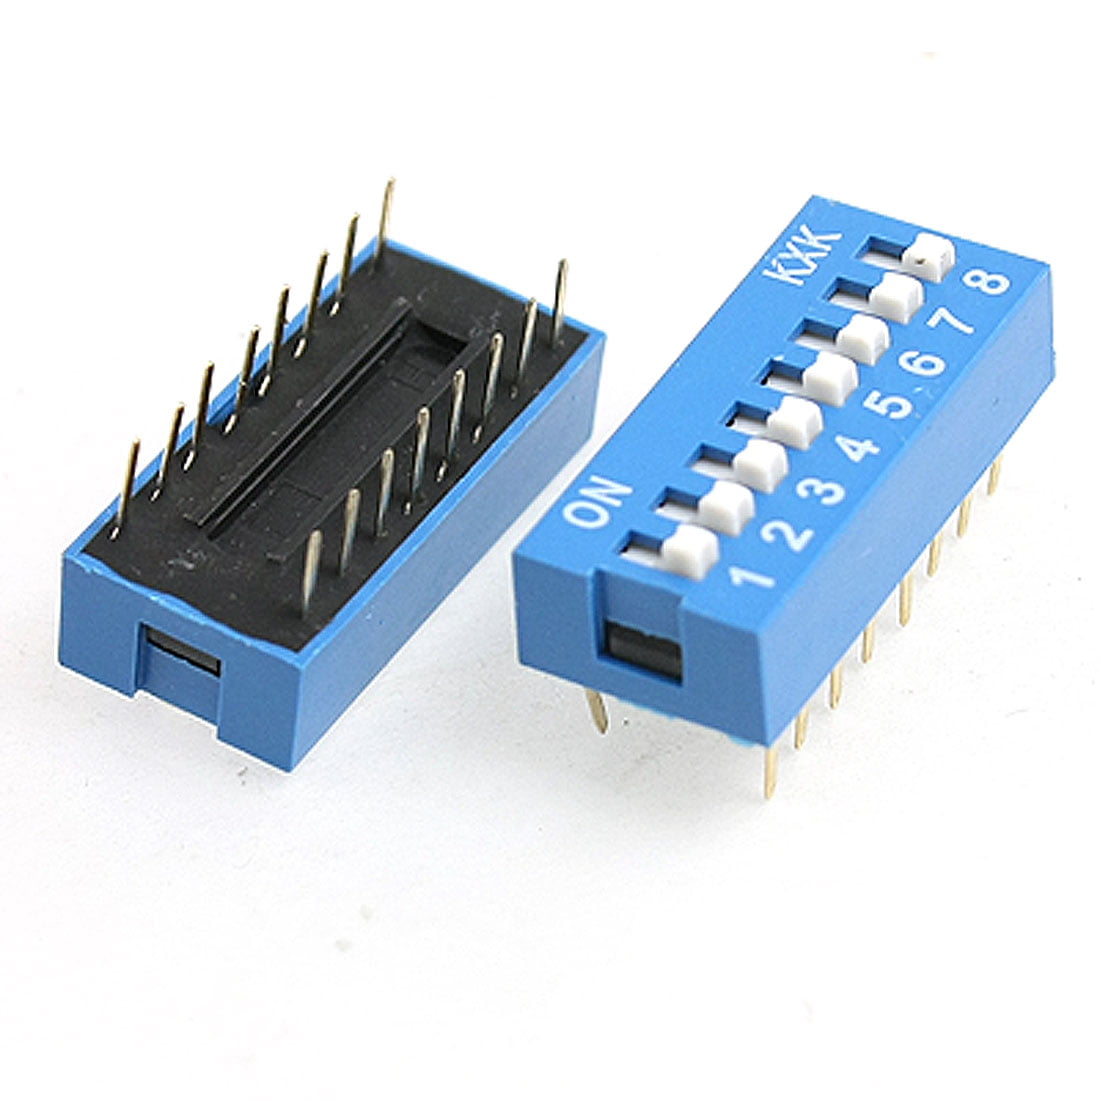 10 Pcs 2 Row 8 Pin 4P Positions 2.54mm Pitch DIP Switch Blue 